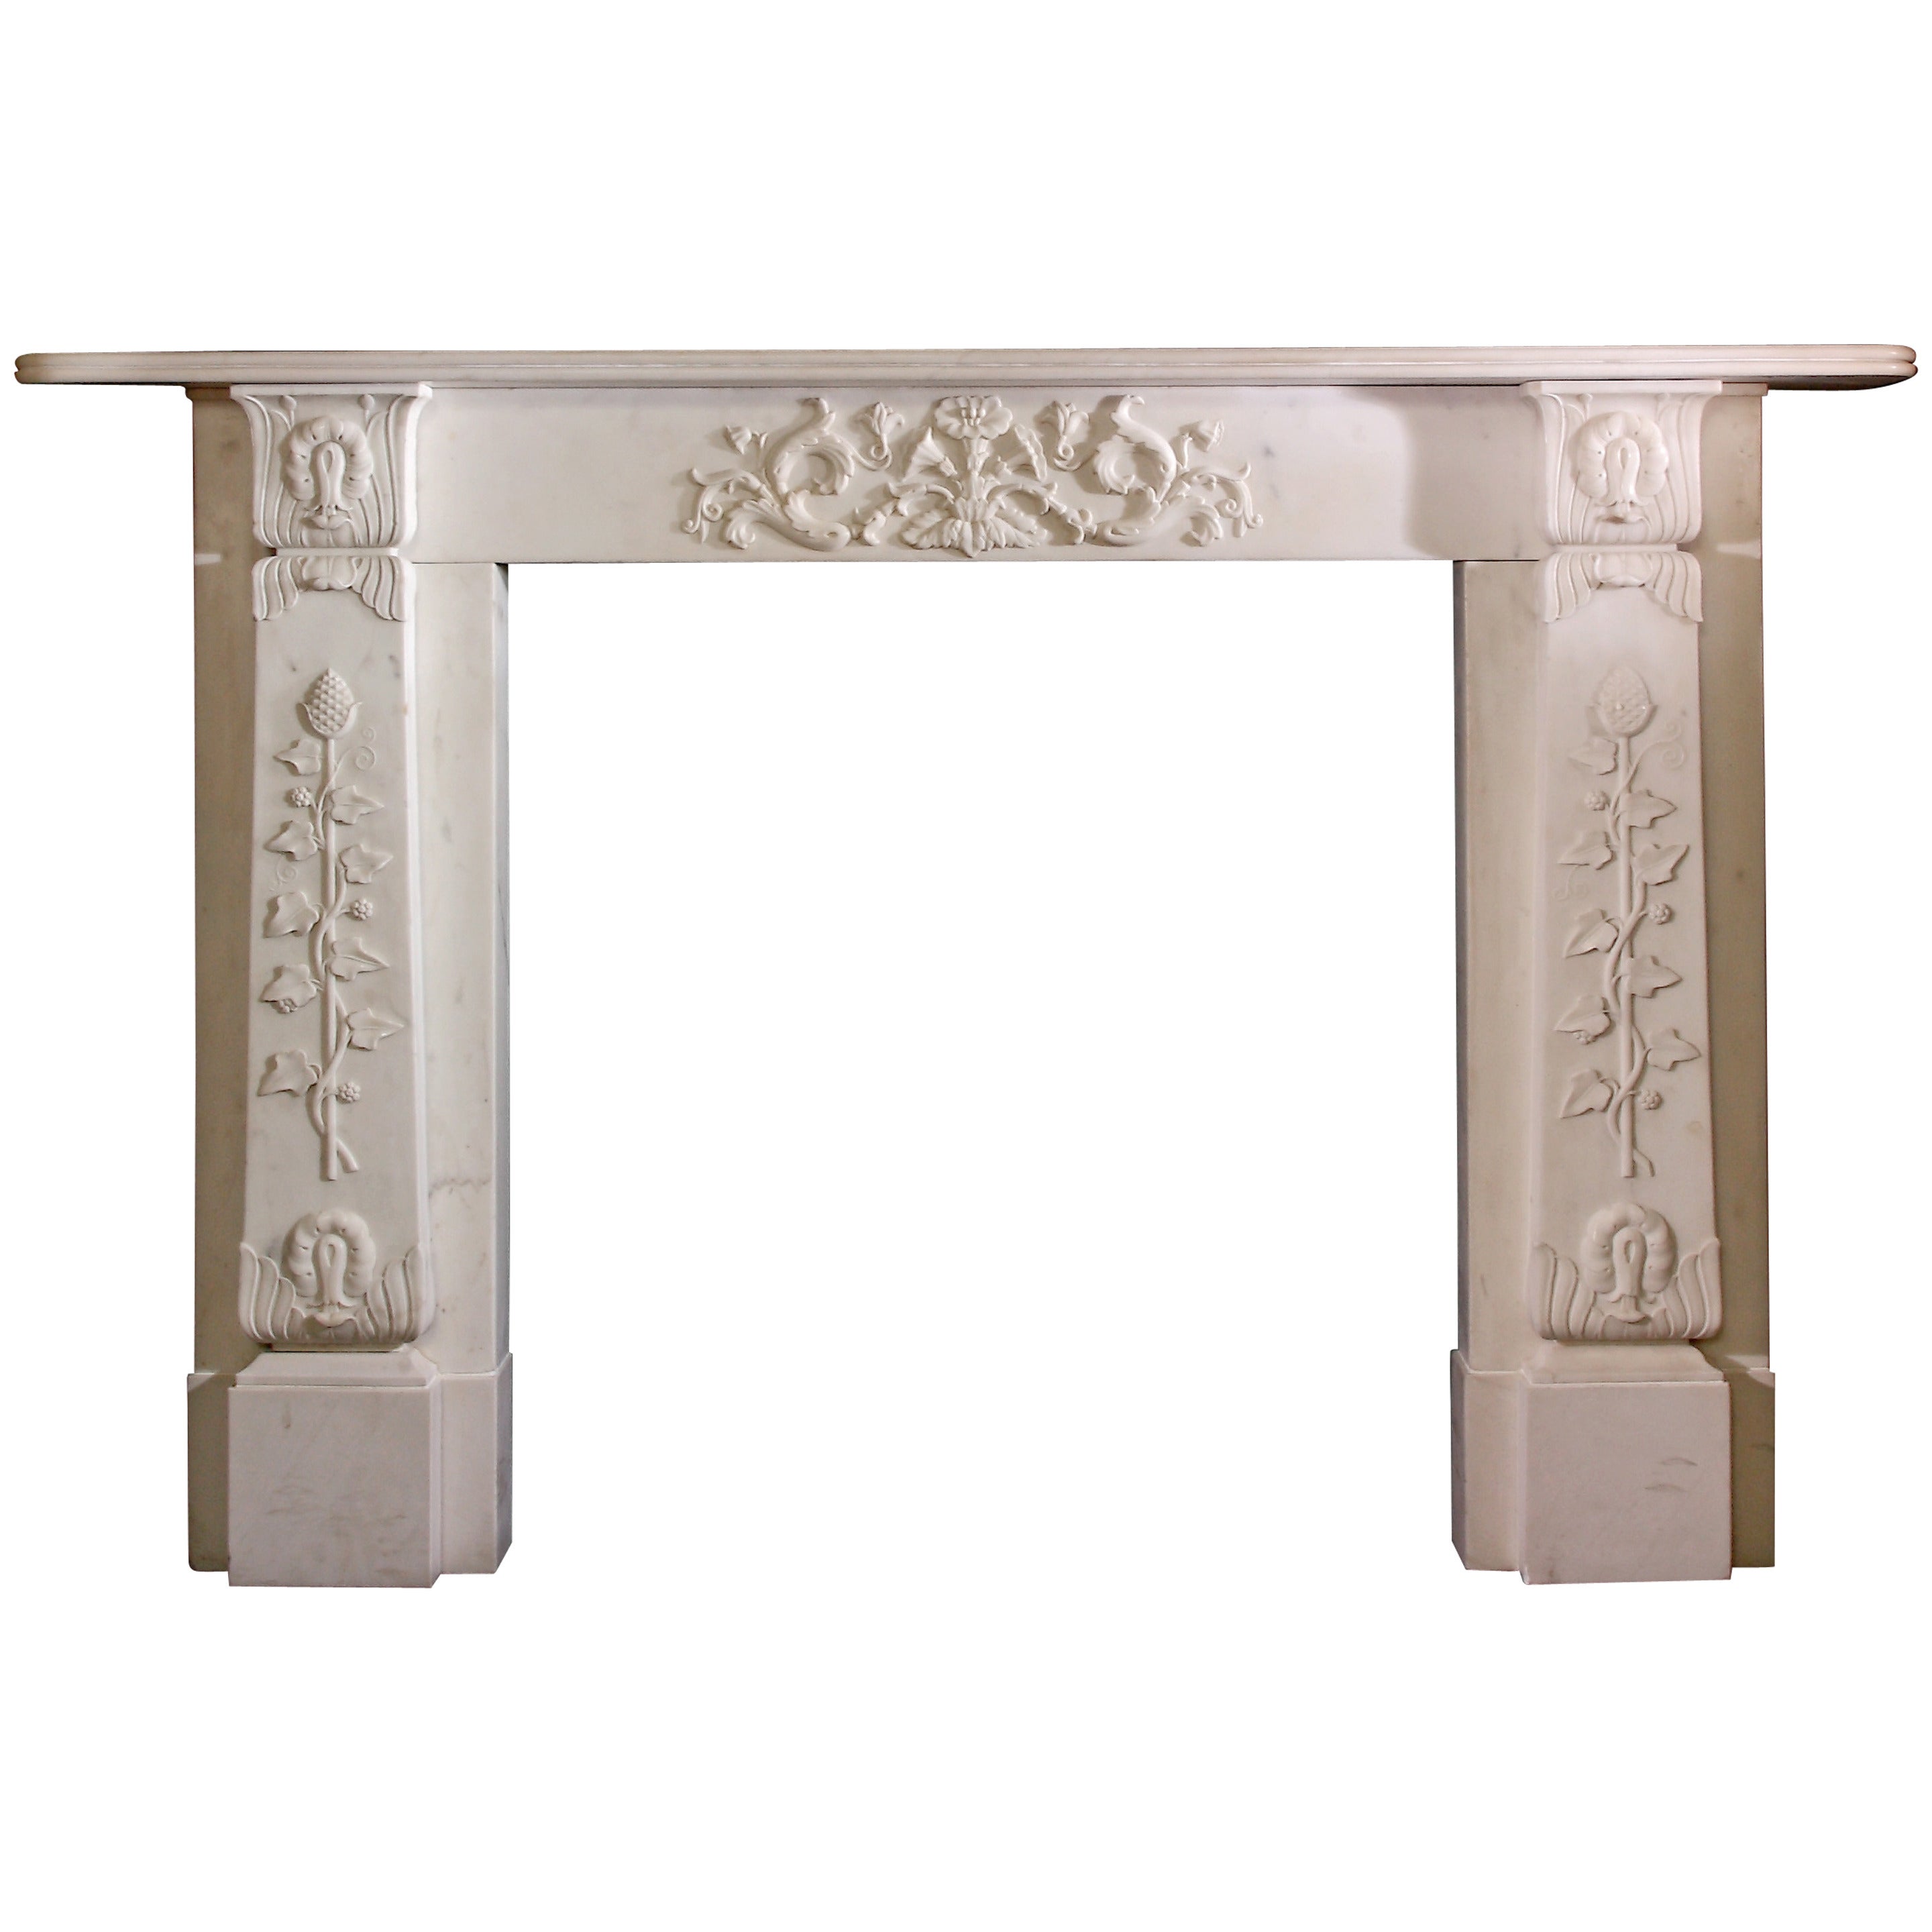 19th Century Regency Statuary Marble Mantel with Carving